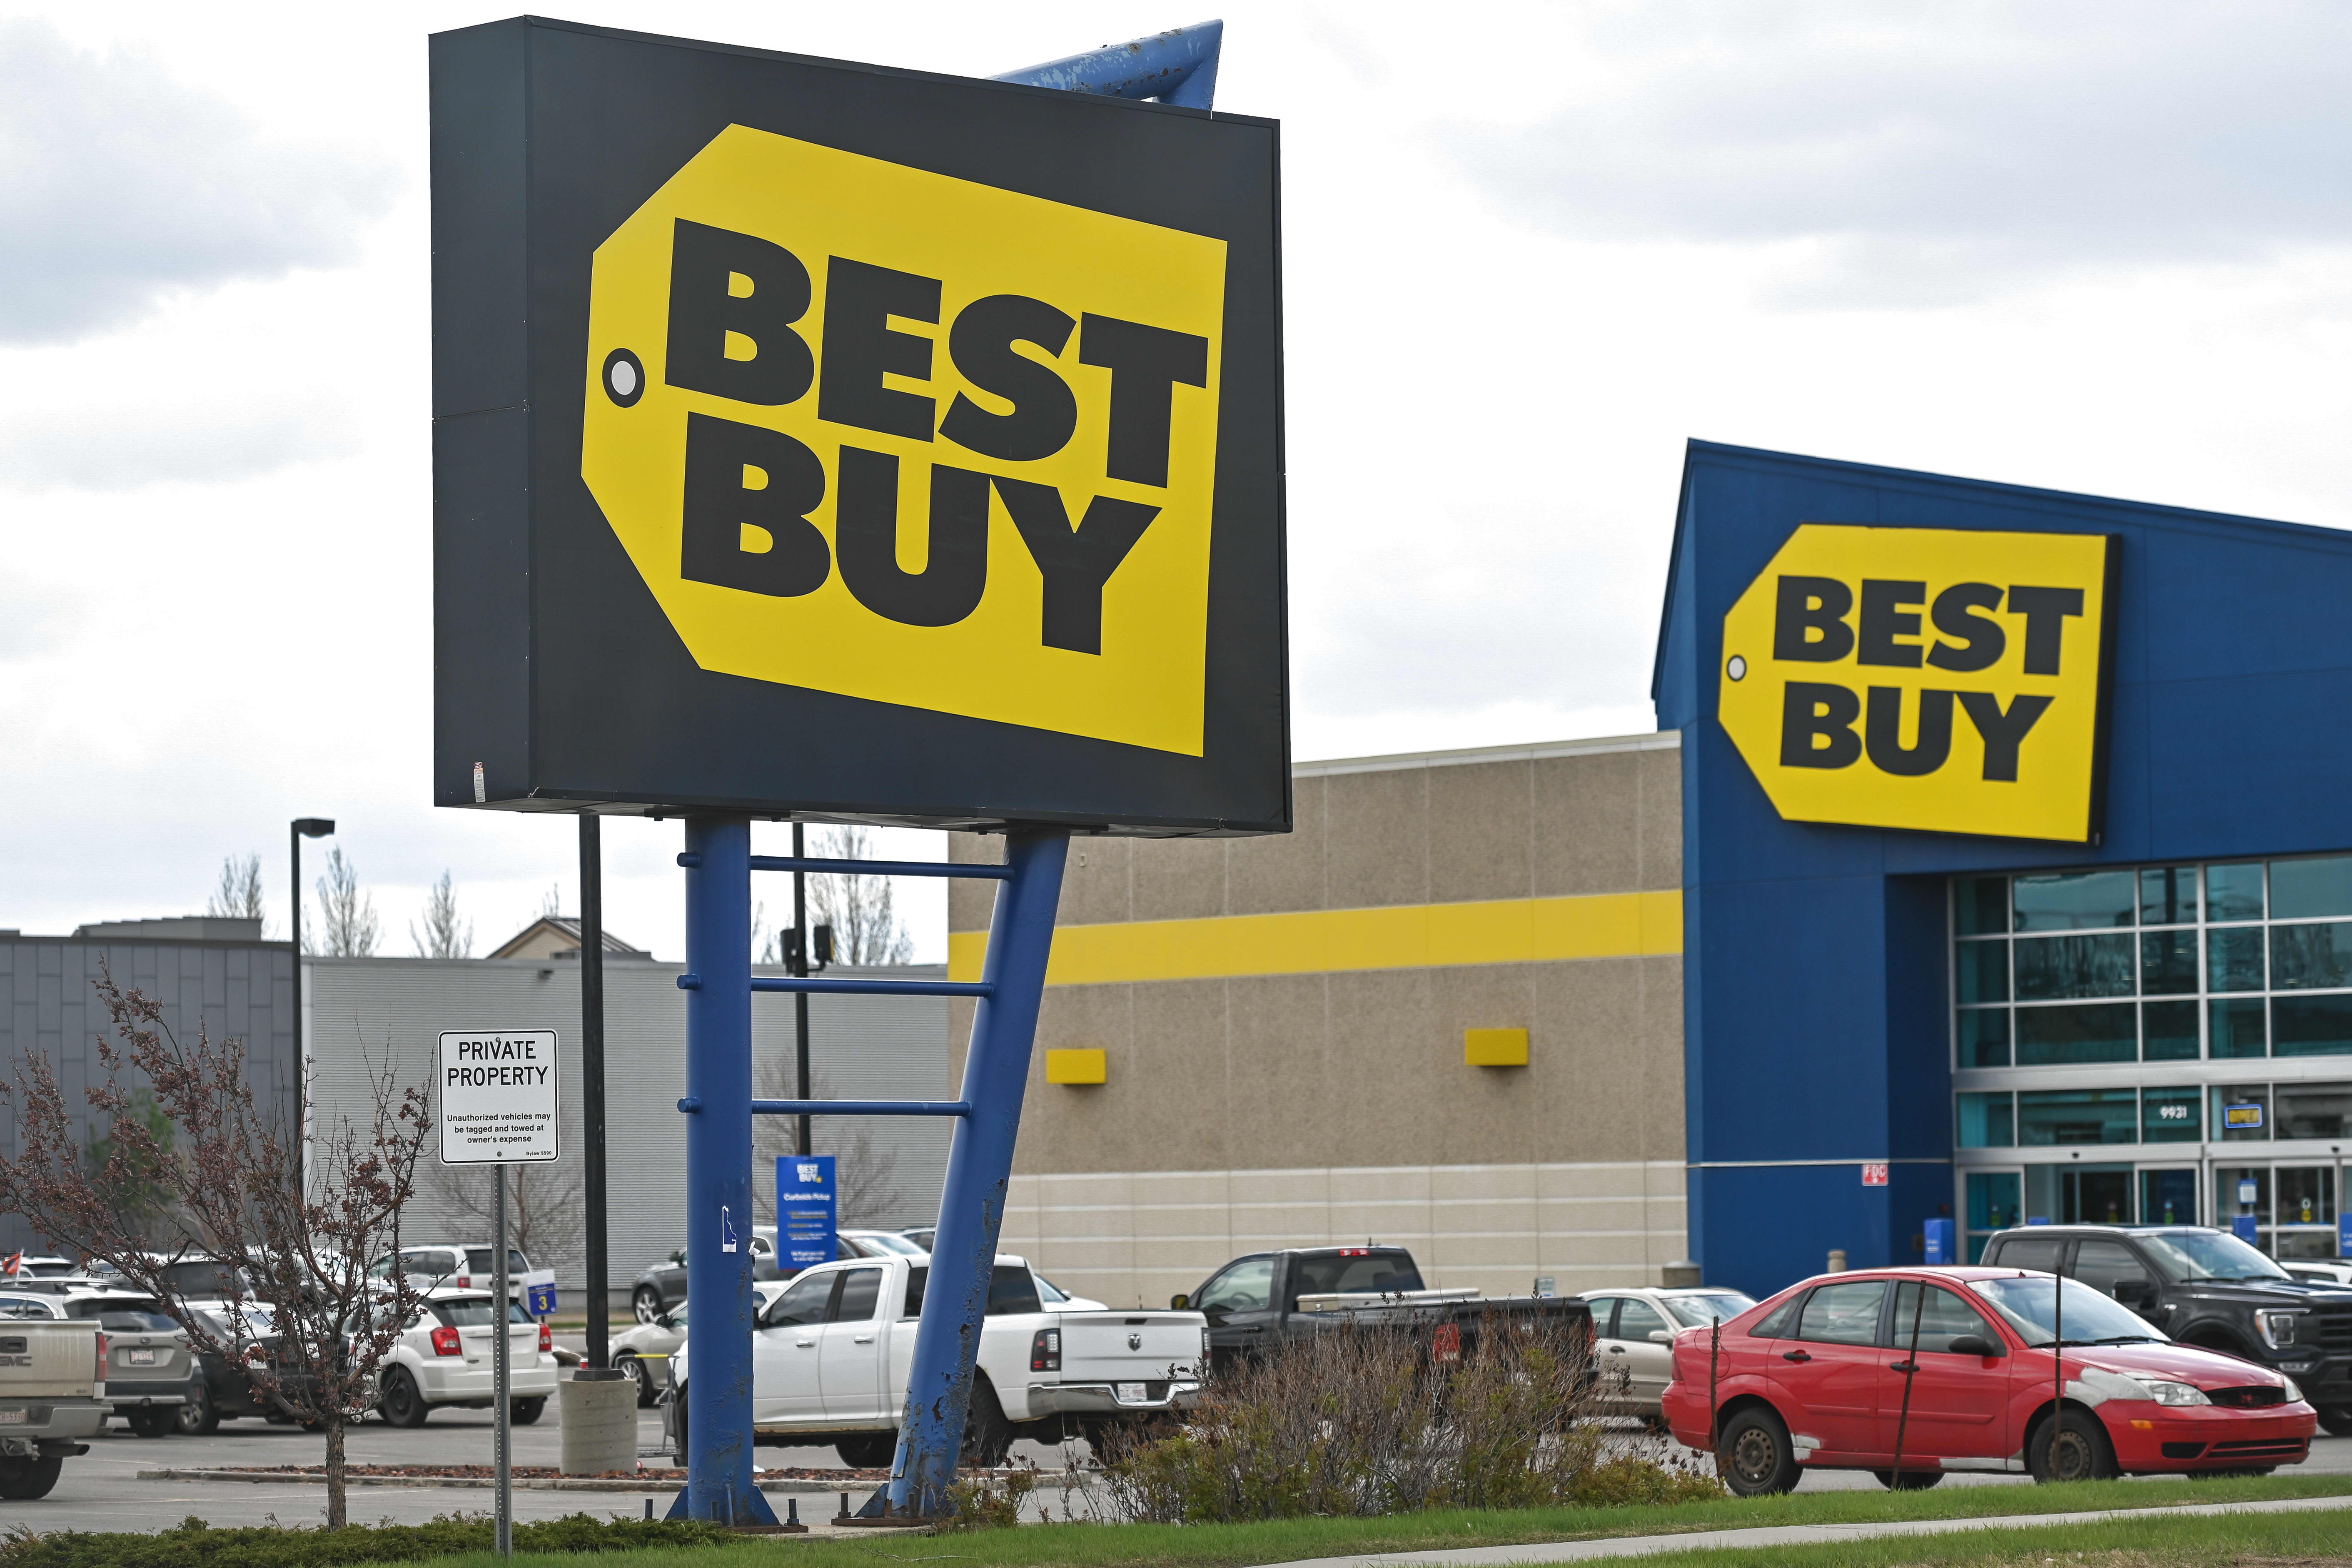 Best Buy lays off hundreds of store employees as shopping trends shift